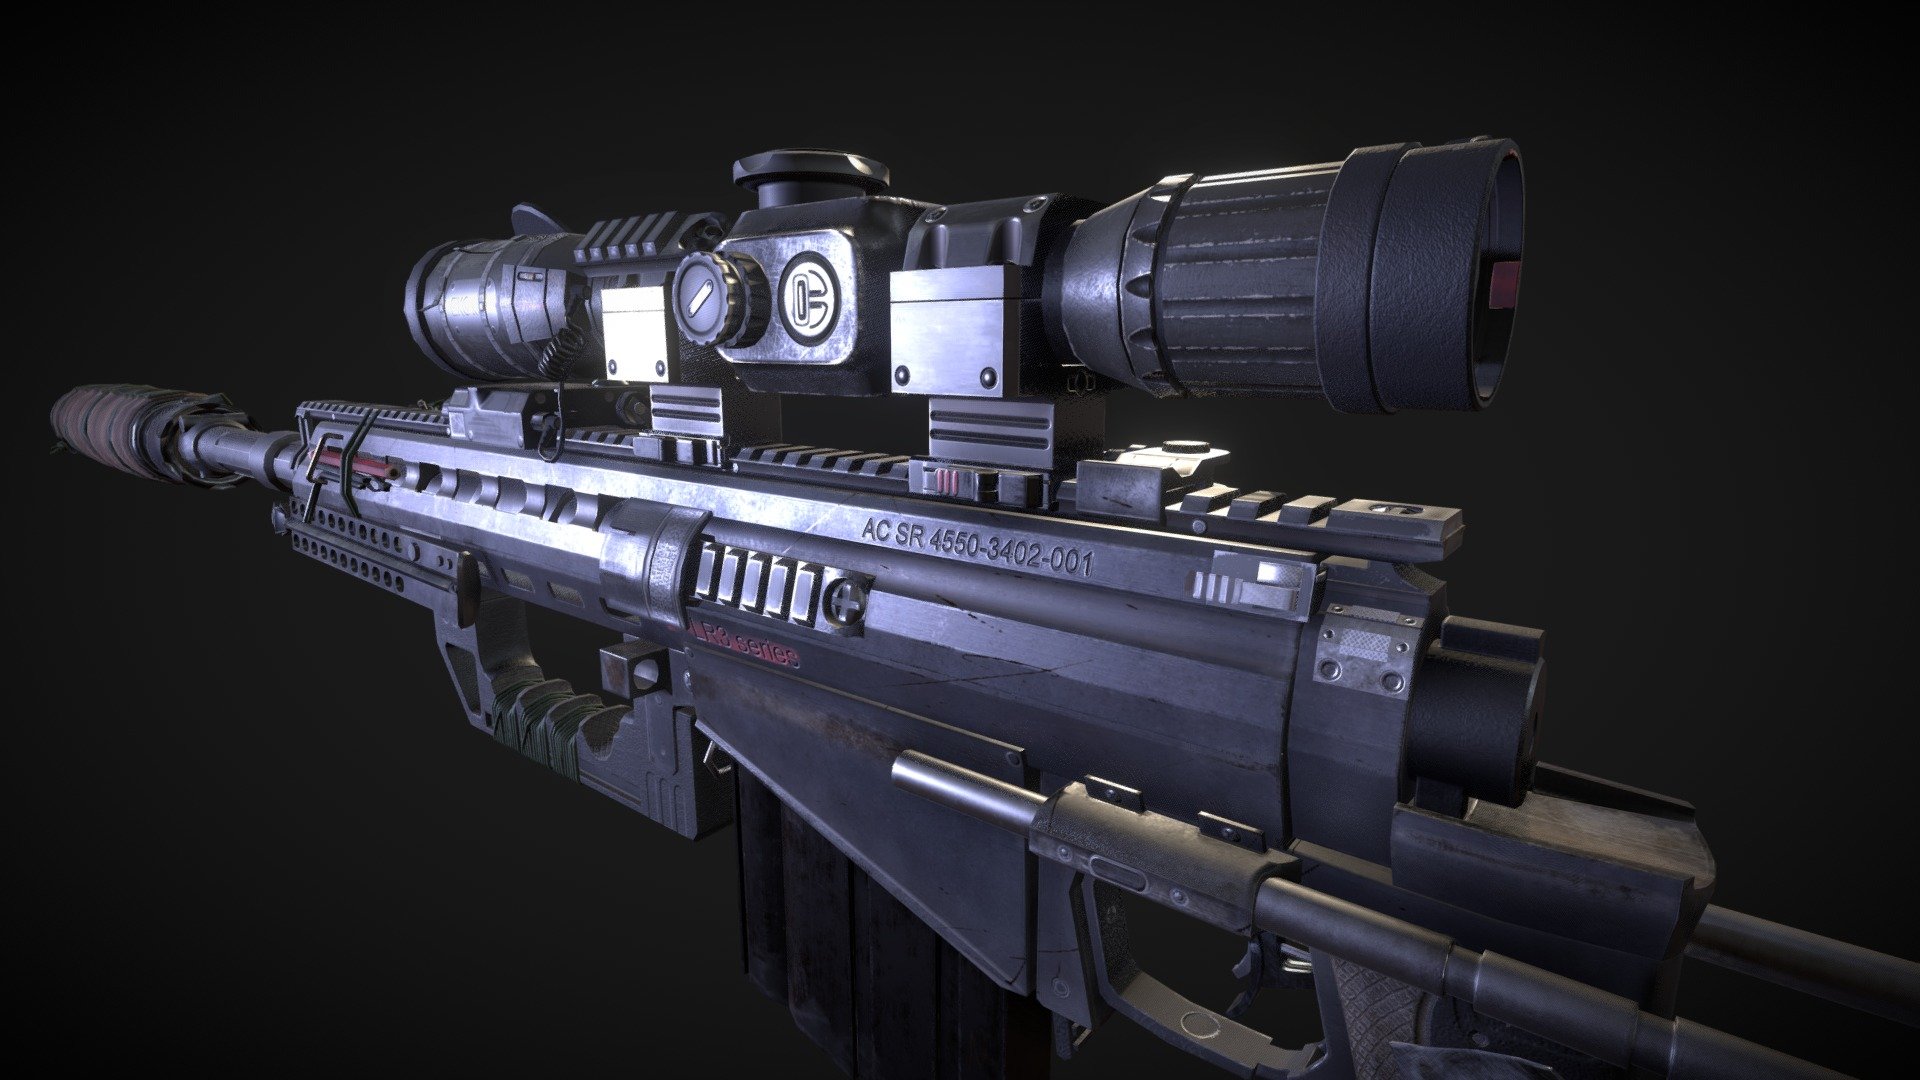 As a huge fan of MW2 I always loved the two main sniper rifles in the game. Here is a little mix between those two beasts.
Renders : https://www.artstation.com/artwork/Z5earG - Barrett M200 - 3D model by Links_Even 3d model